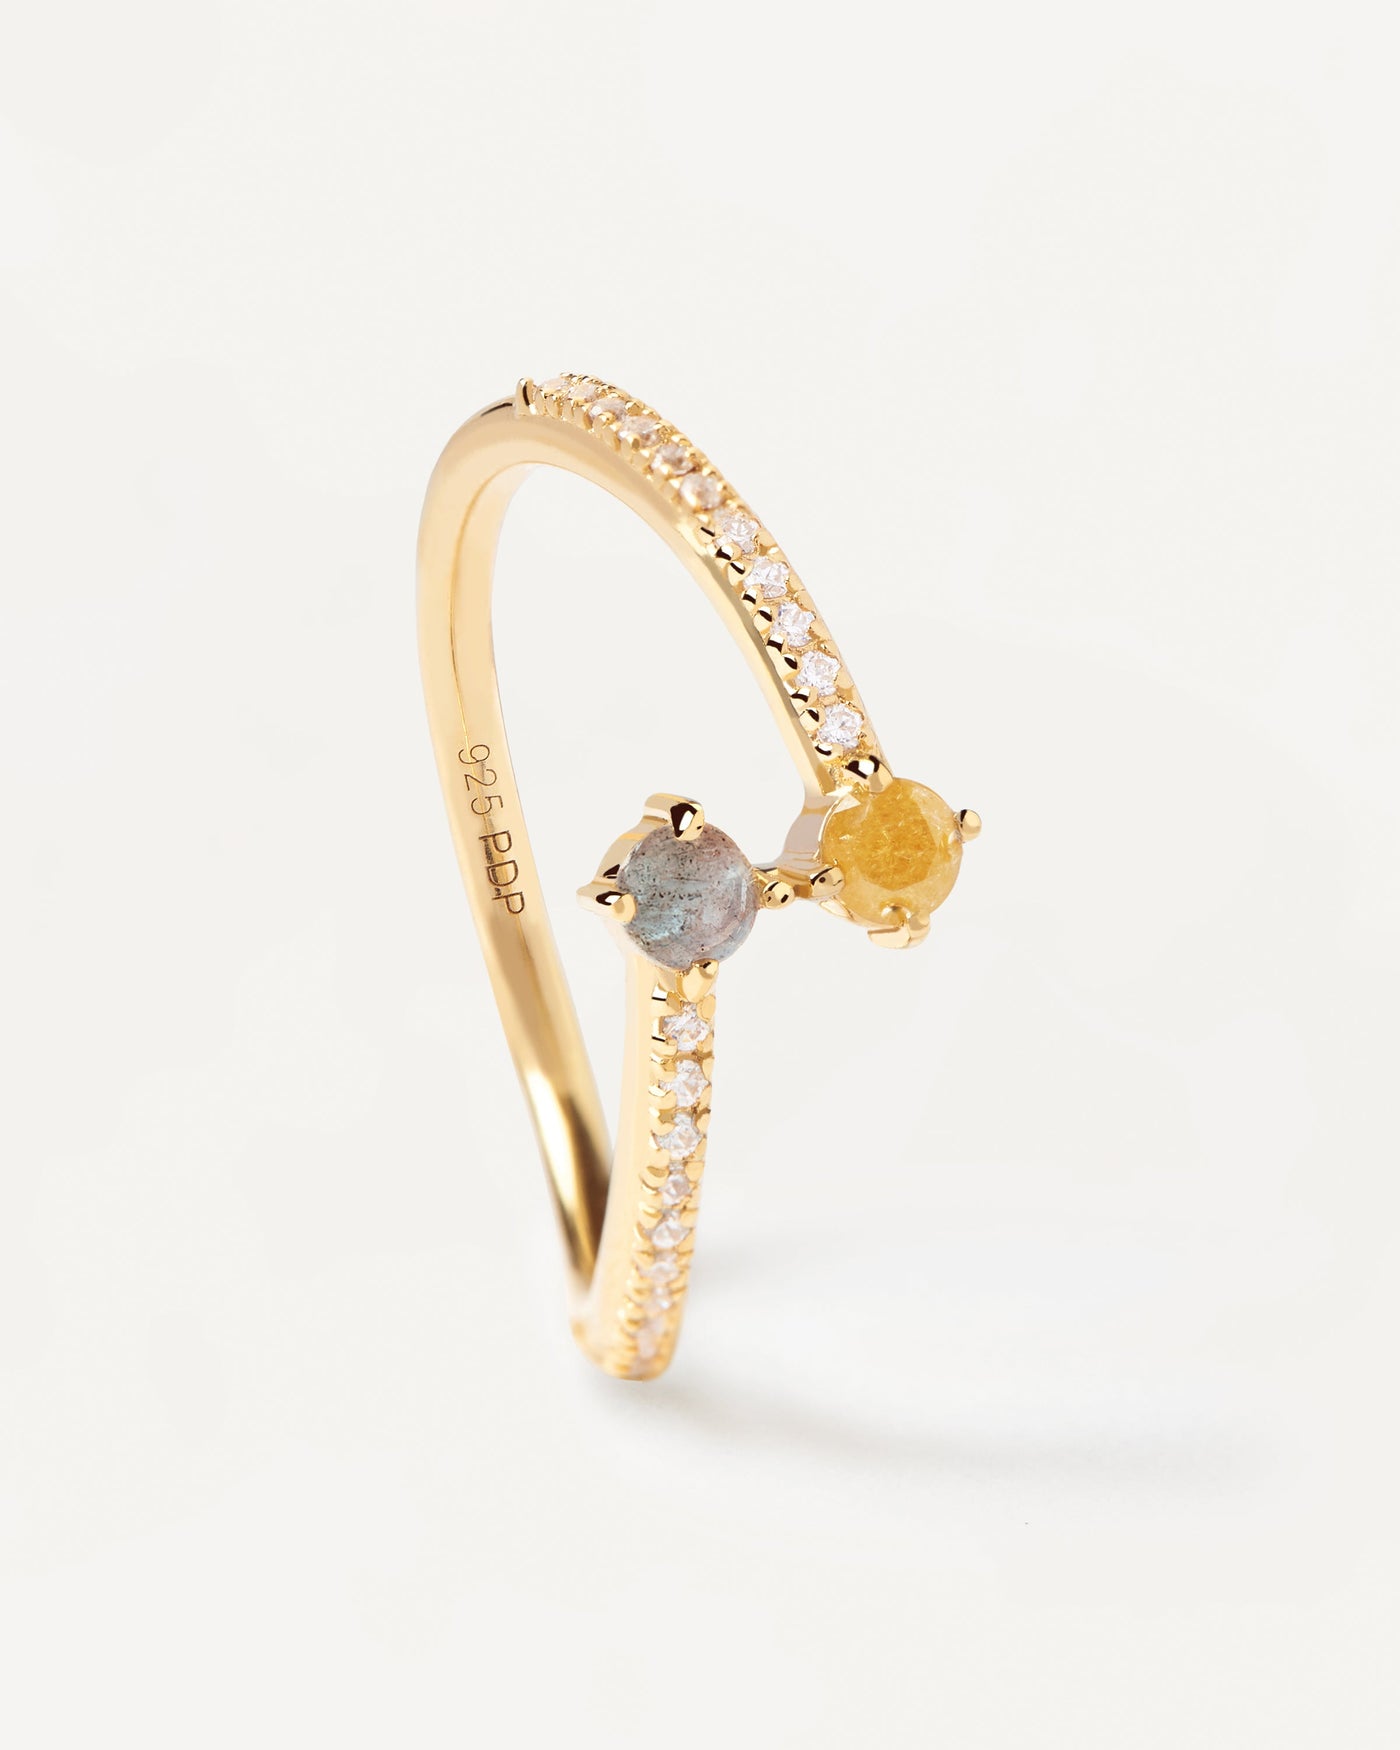 2023 Selection | Villa Ring. Gold-plated you-and-me ring with gemstones. Get the latest arrival from PDPAOLA. Place your order safely and get this Best Seller. Free Shipping.